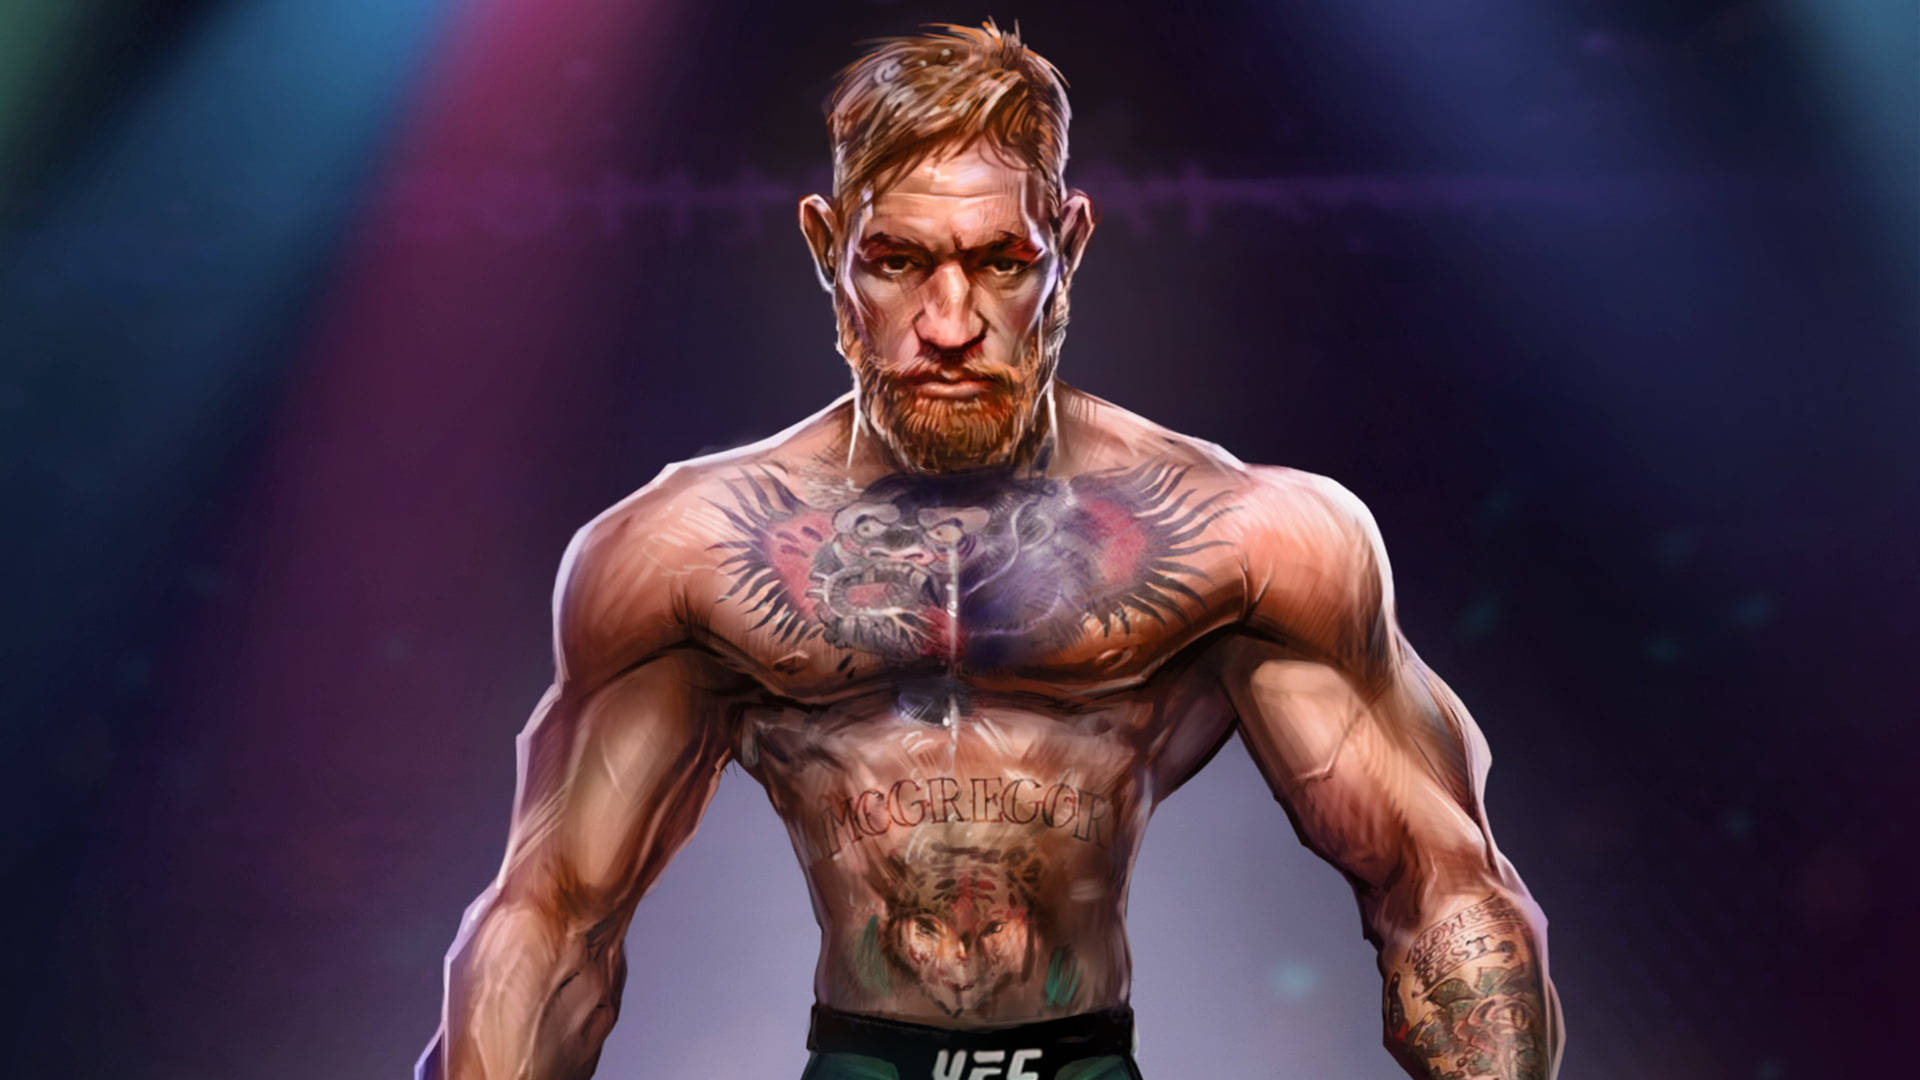 Conor Mcgregor Unleashed: A Display Of Raw Power